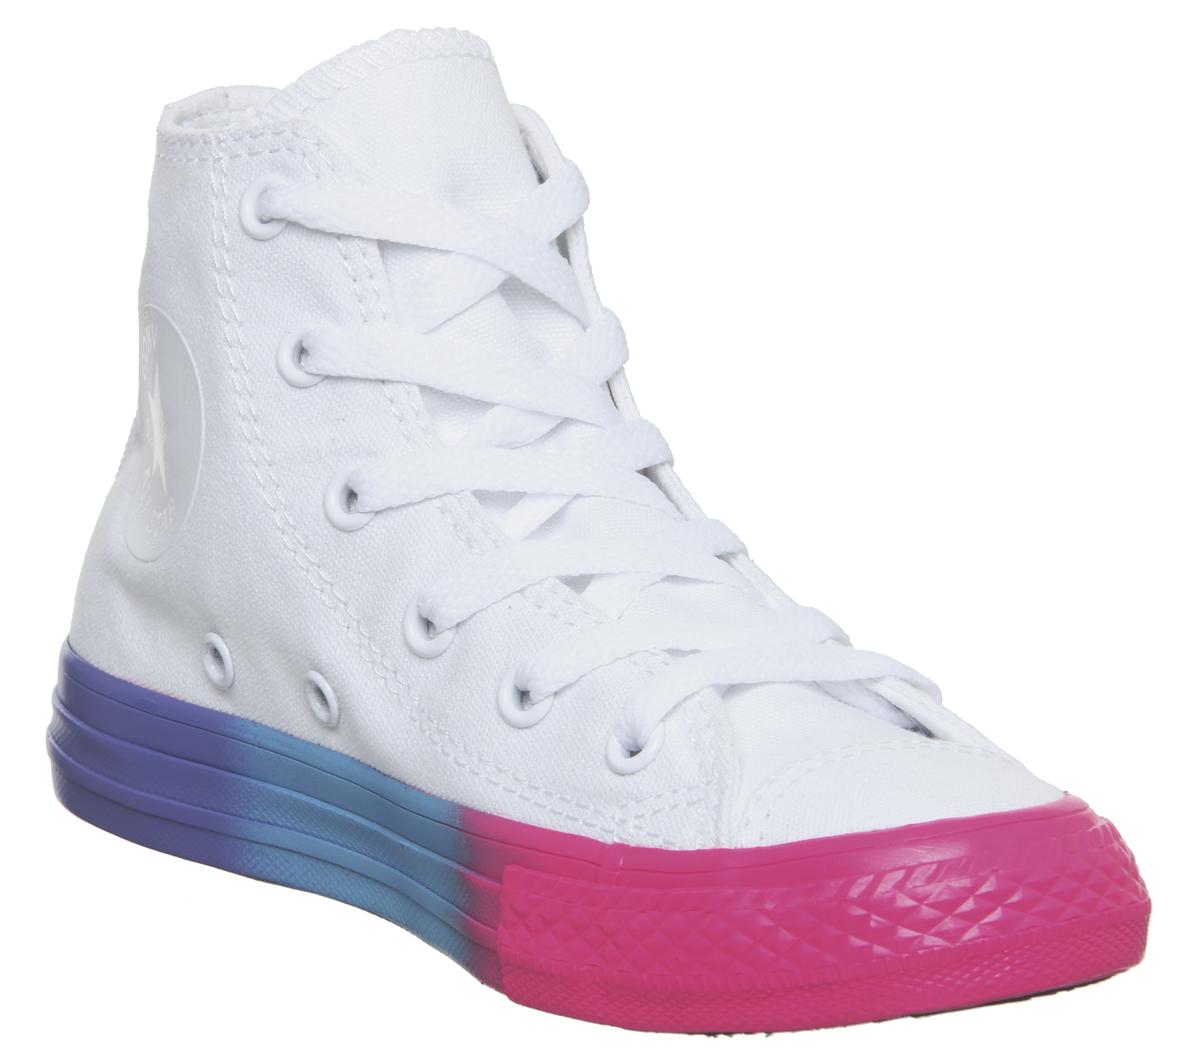 ConverseAll Star Hi Mid Sizes TrainersWhite Racer Pink Black